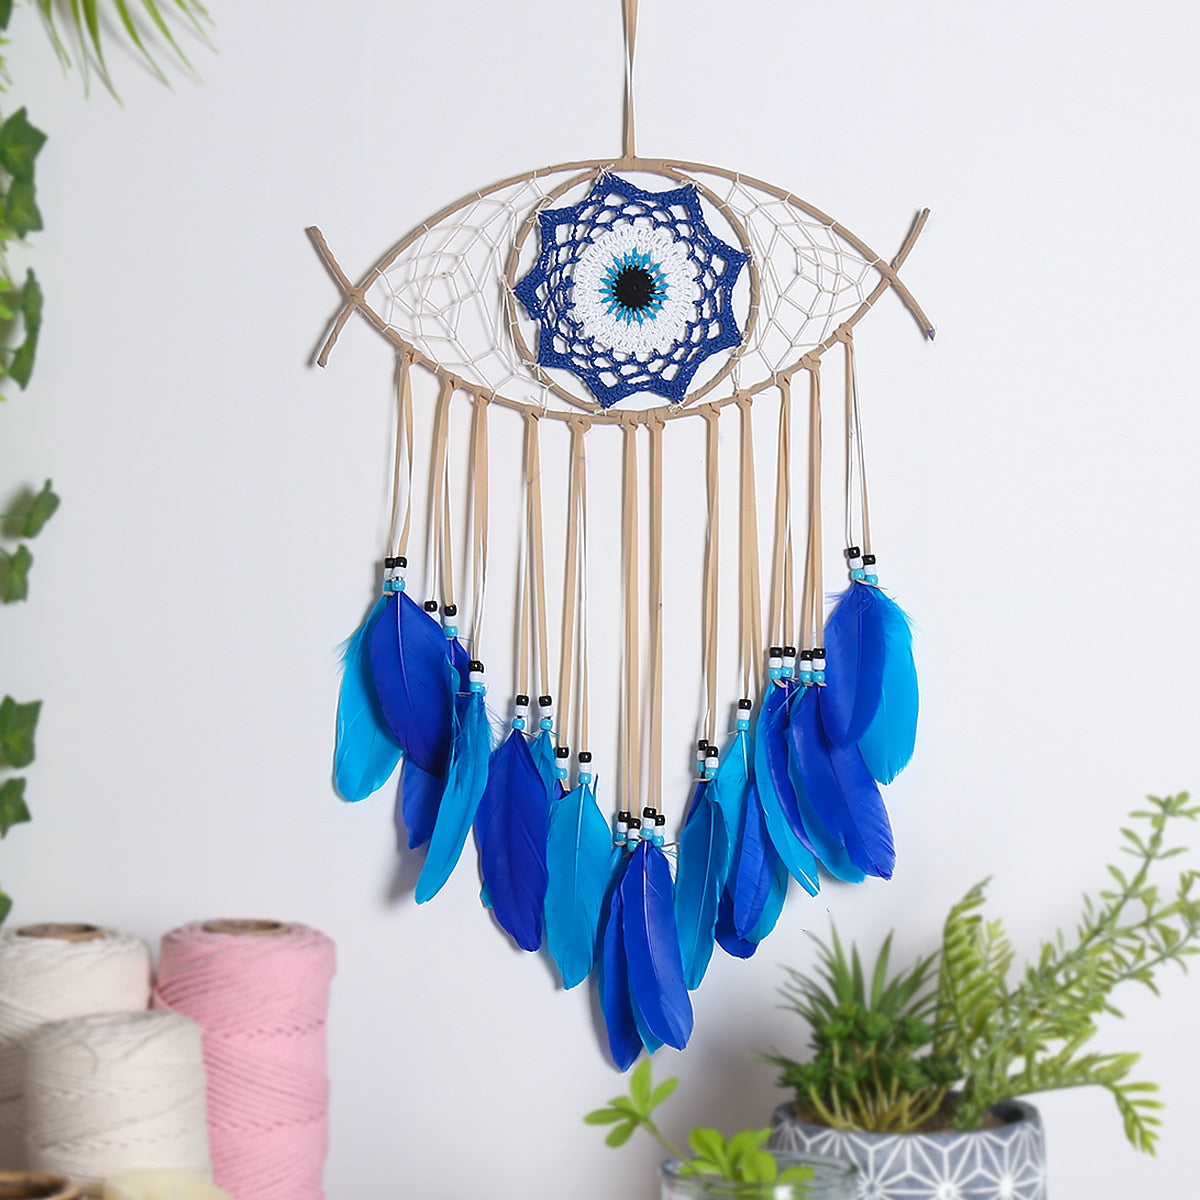 Dream Catcher Macrame Wall Hanging Bohemian Home Decor - Personal Hour for Yoga and Meditations 